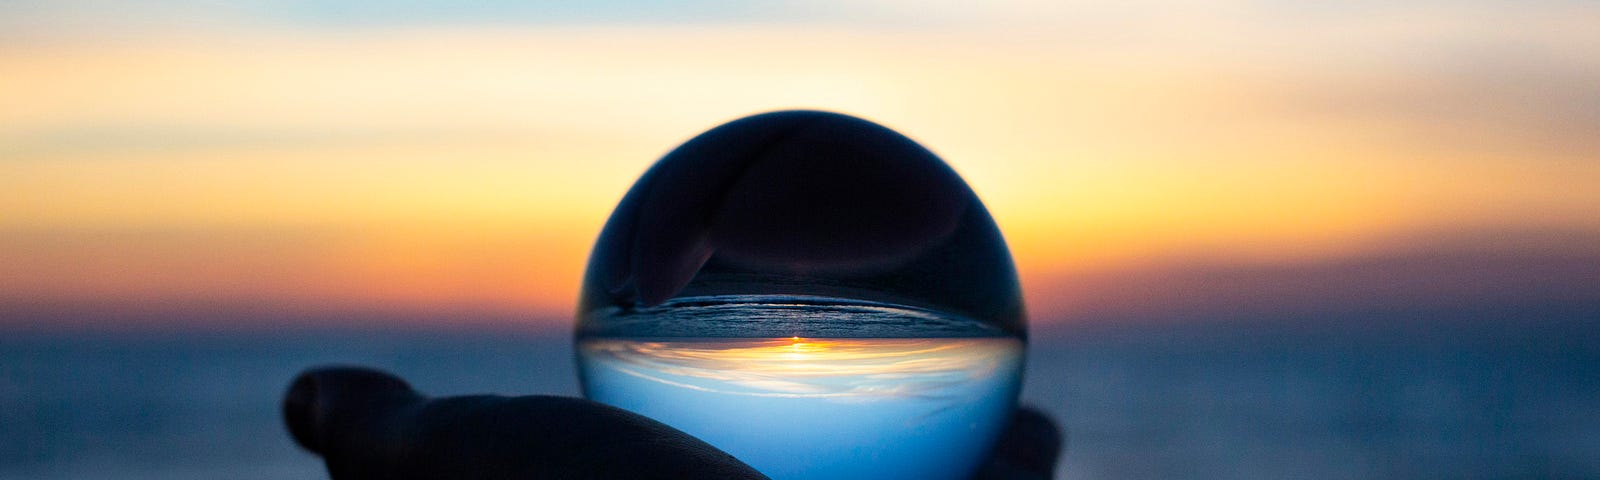 A glass ball with the image of the horizon